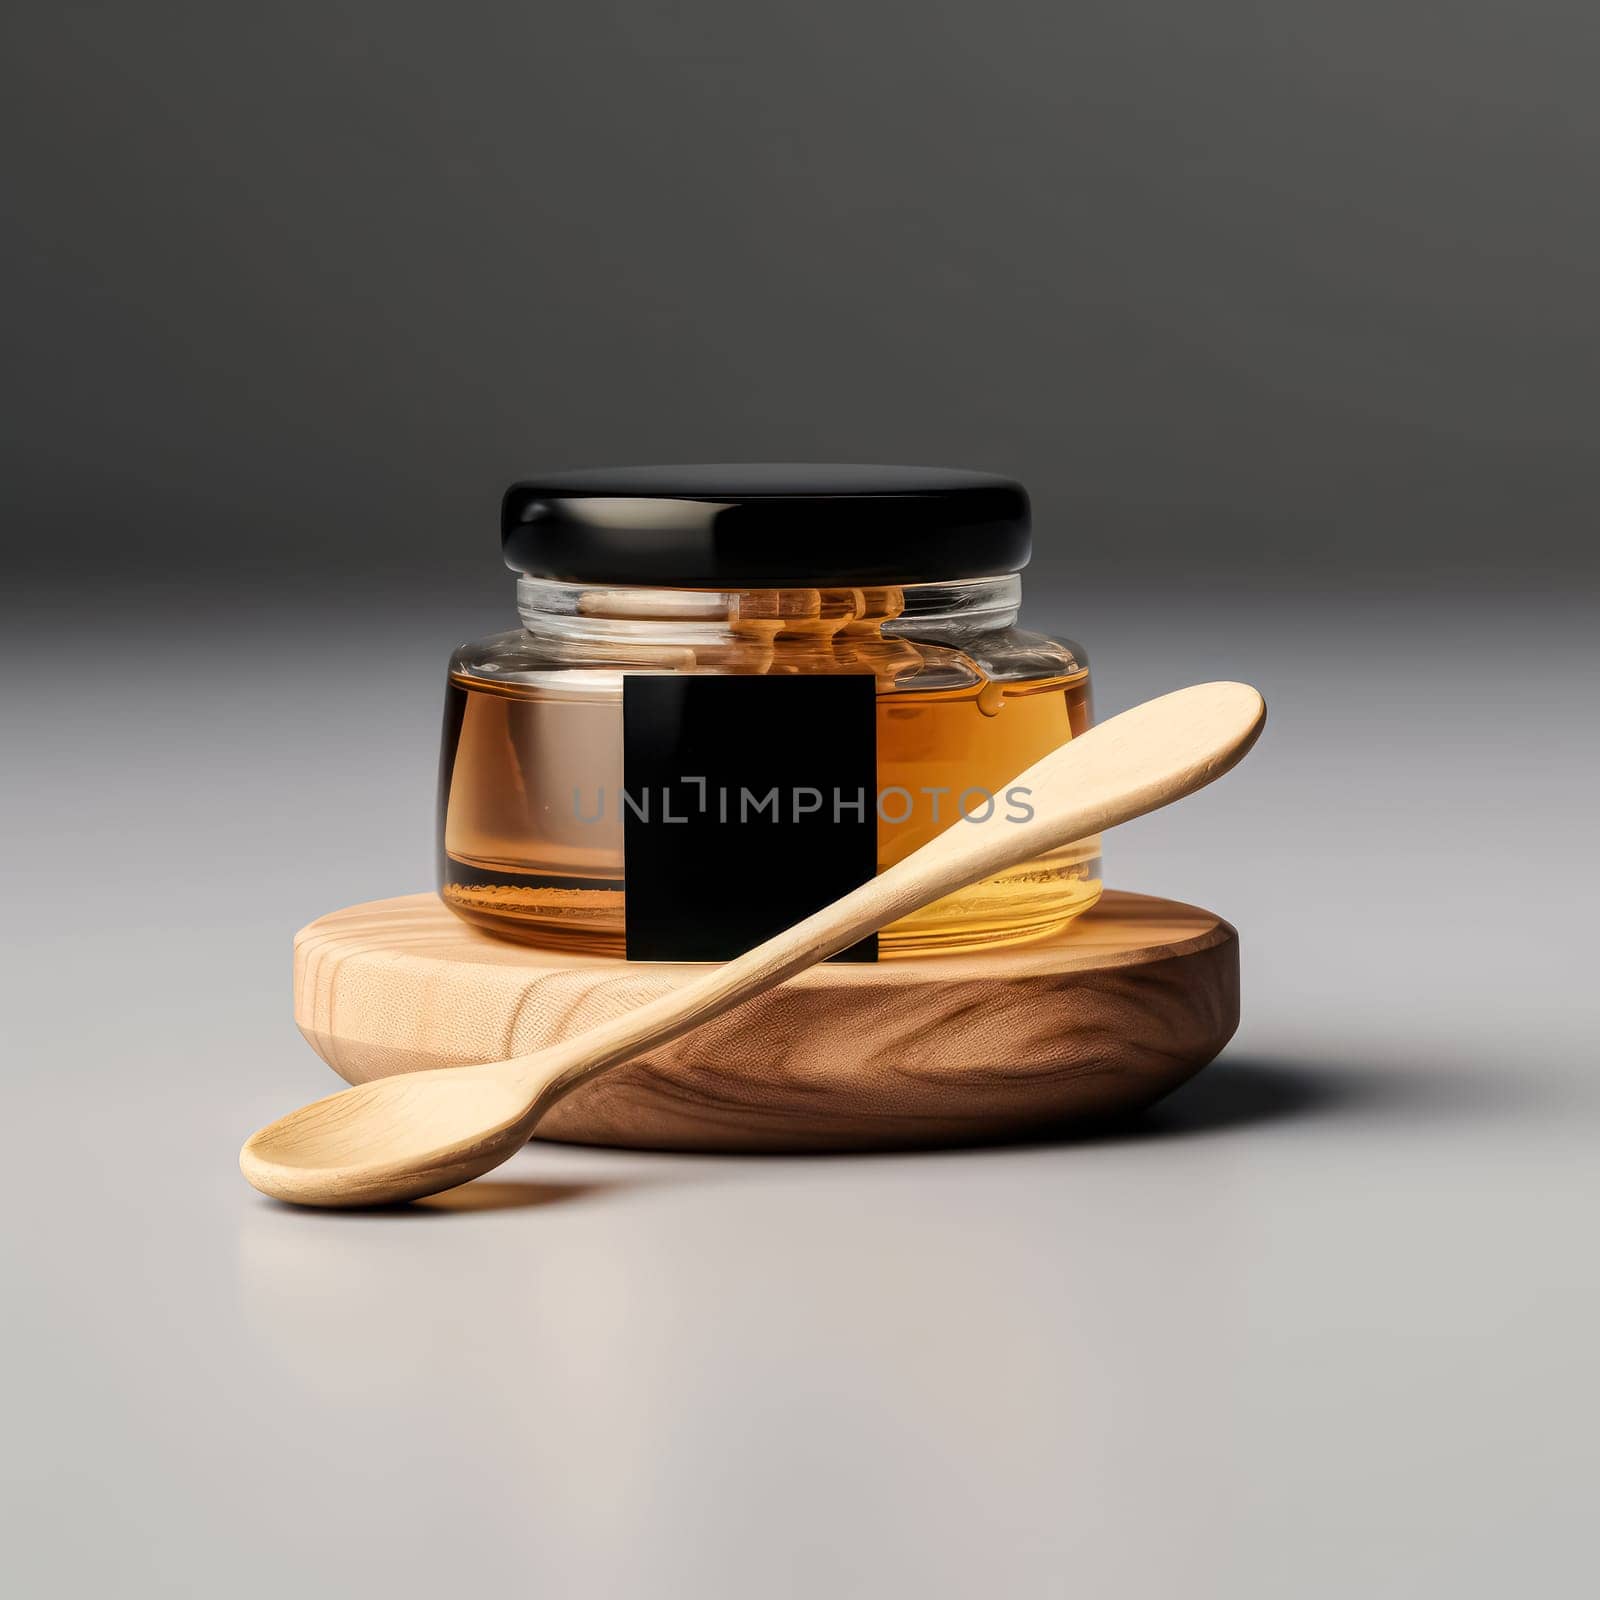 A wooden spoon is next to a jar of honey. The spoon is made of wood and has a curved handle. The jar of honey is in a glass container and is sitting on a white background